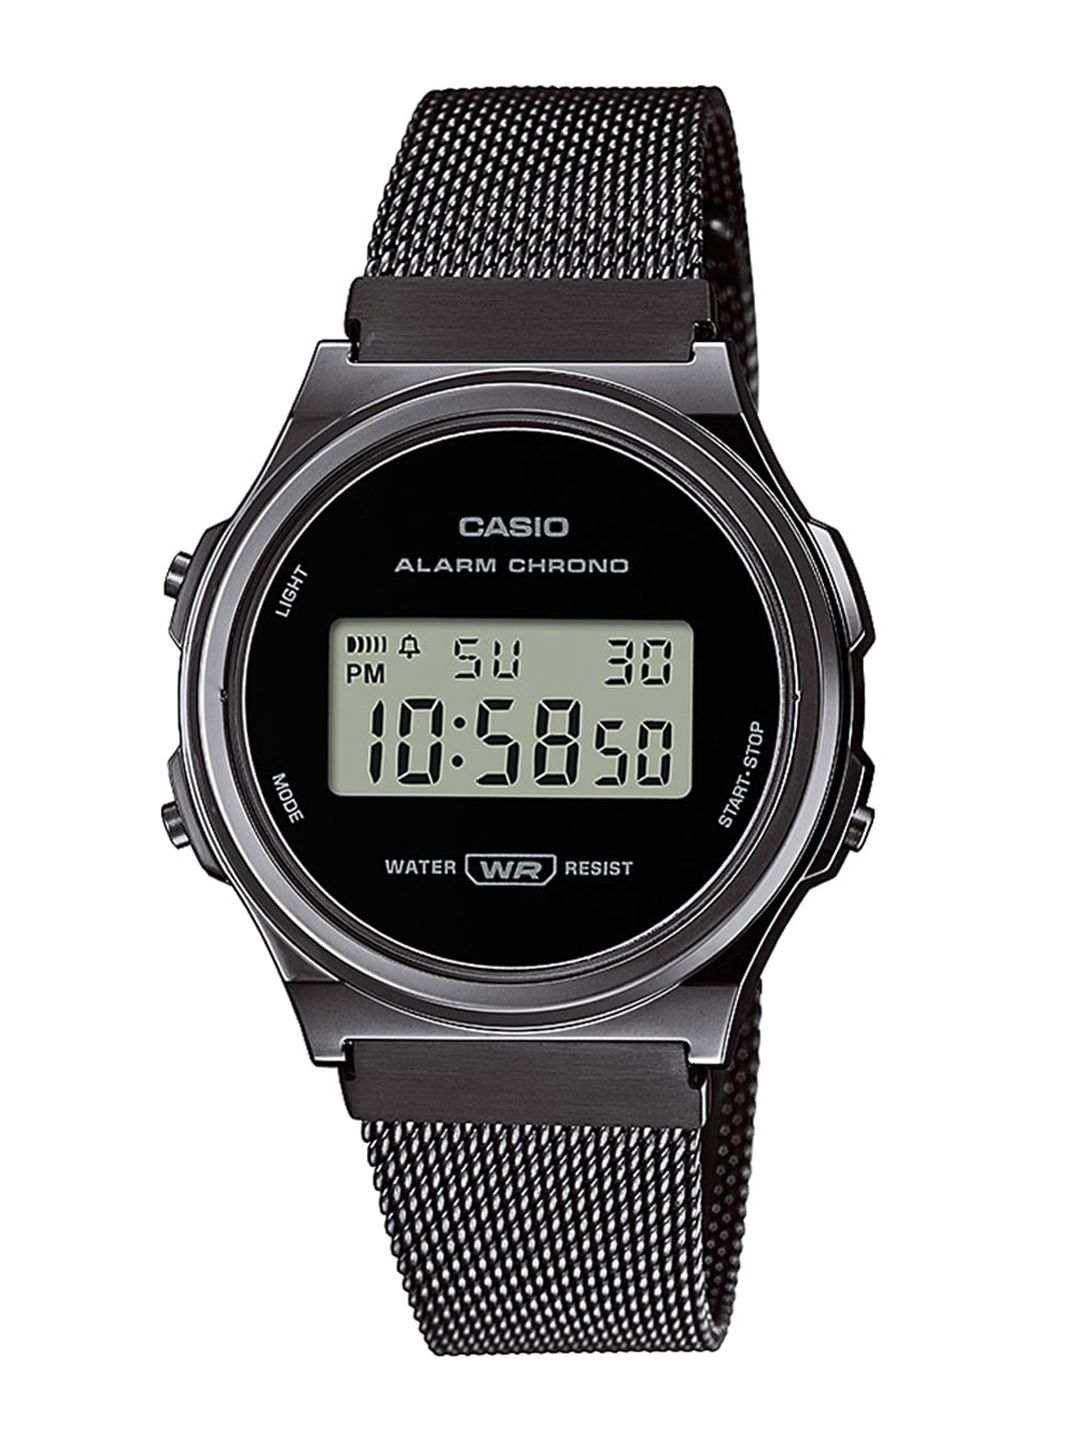 CASIO Black Dial & Black Stainless Steel Straps Digital Watch D260 Price in India